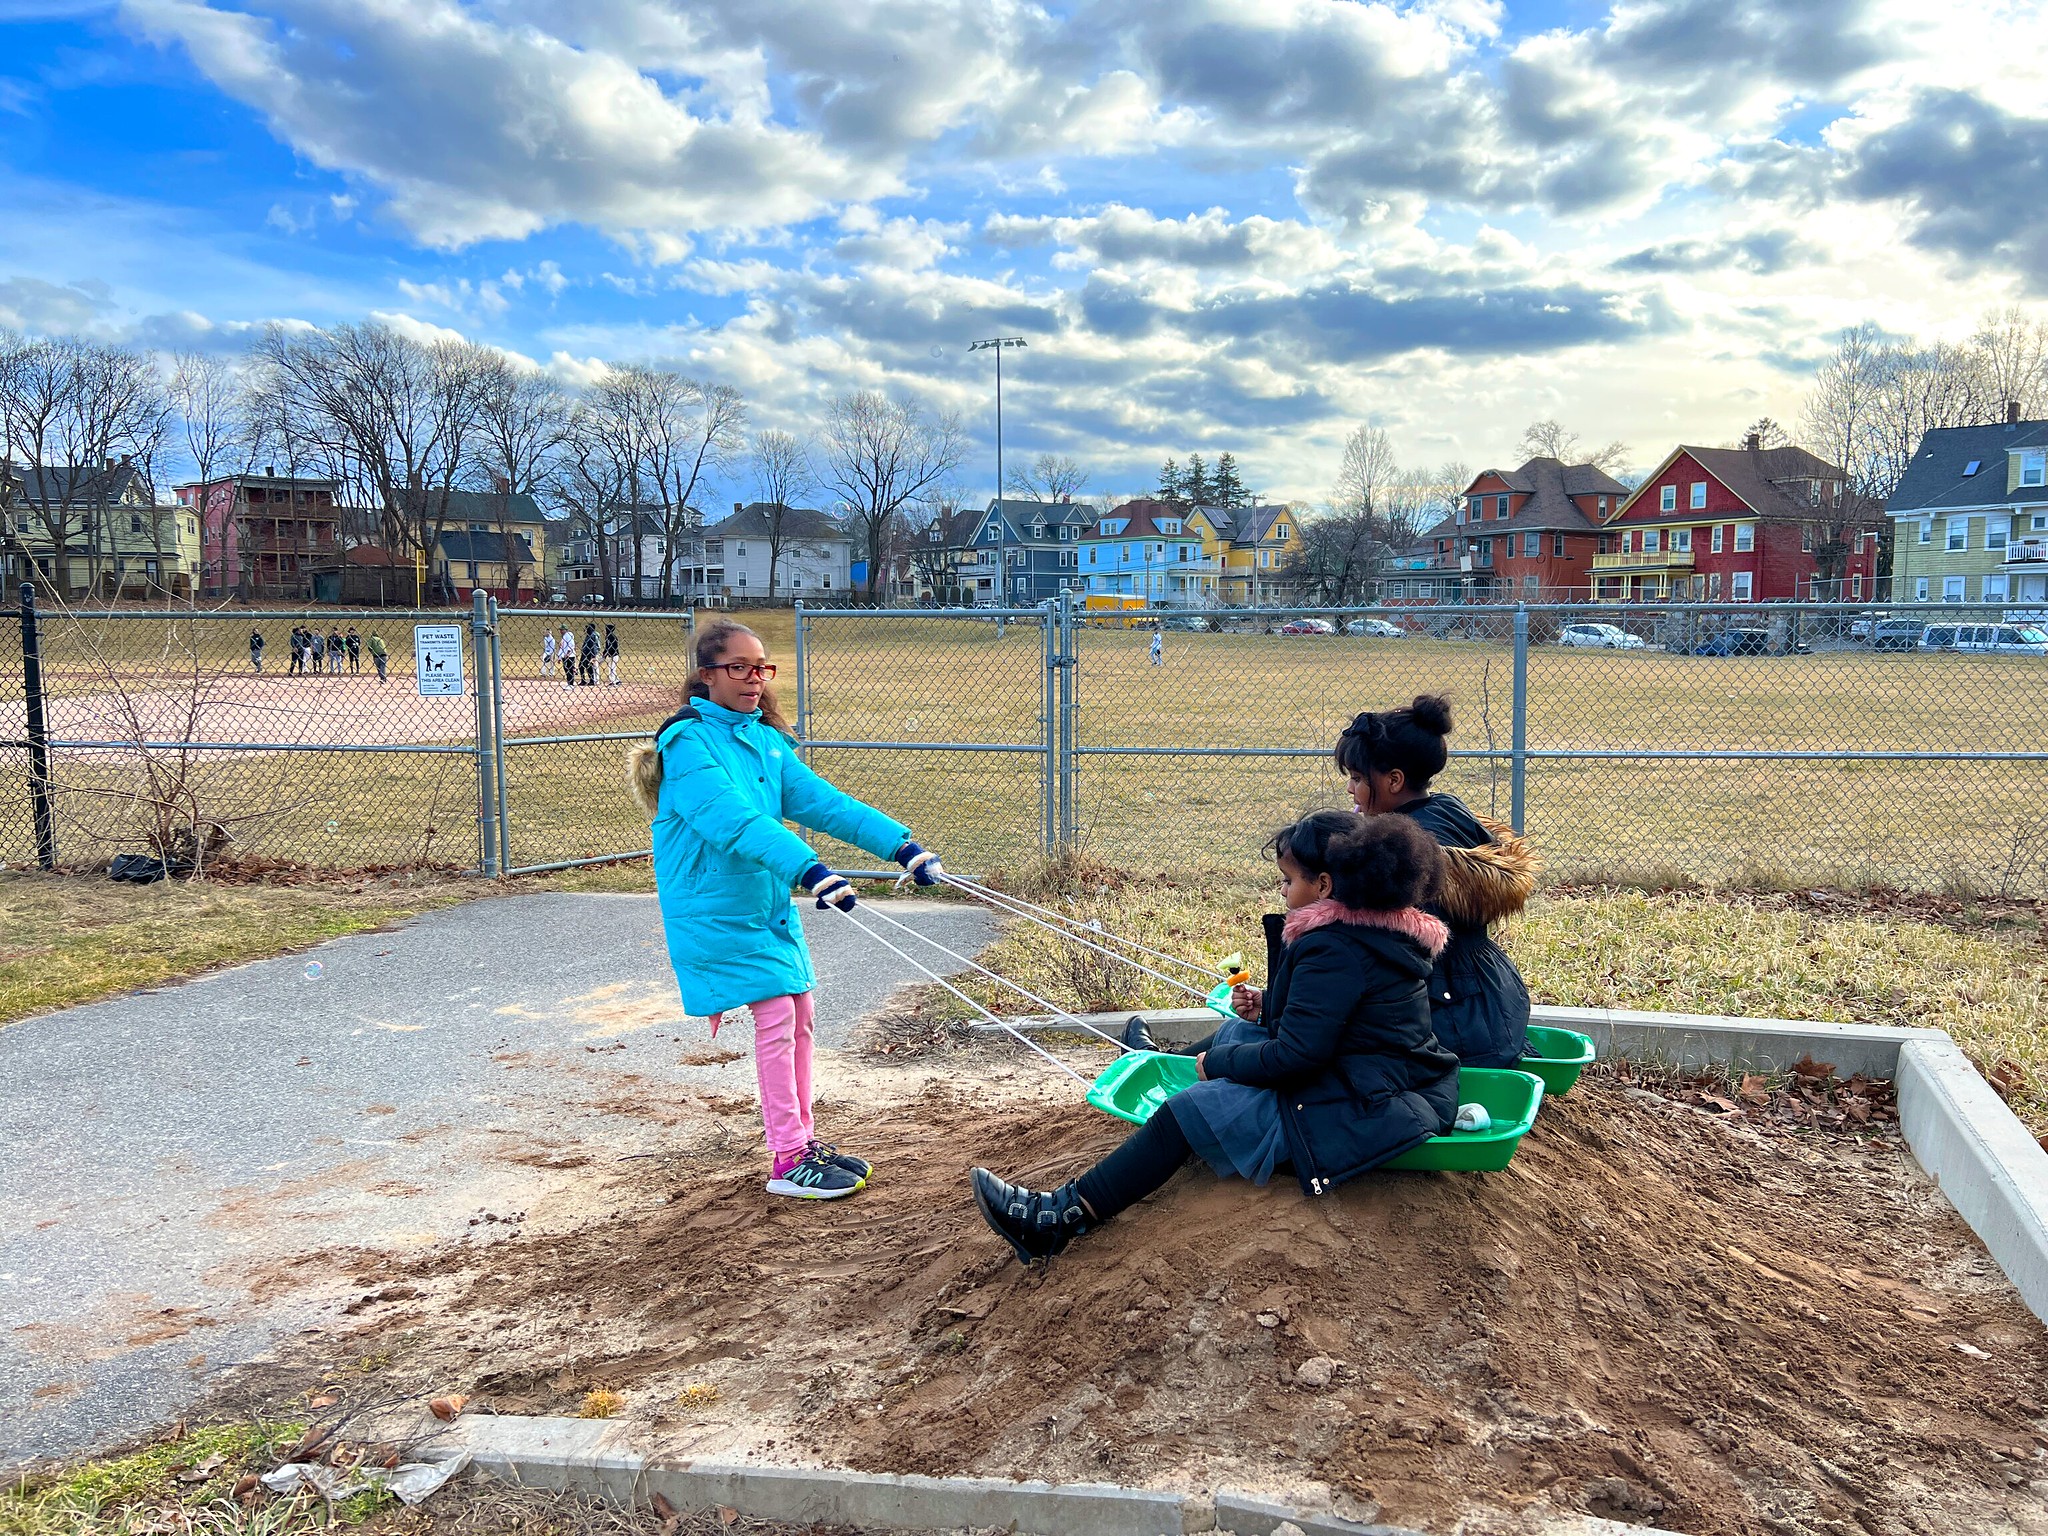 A girl pulls two other young children down a pile of sand on sleds.